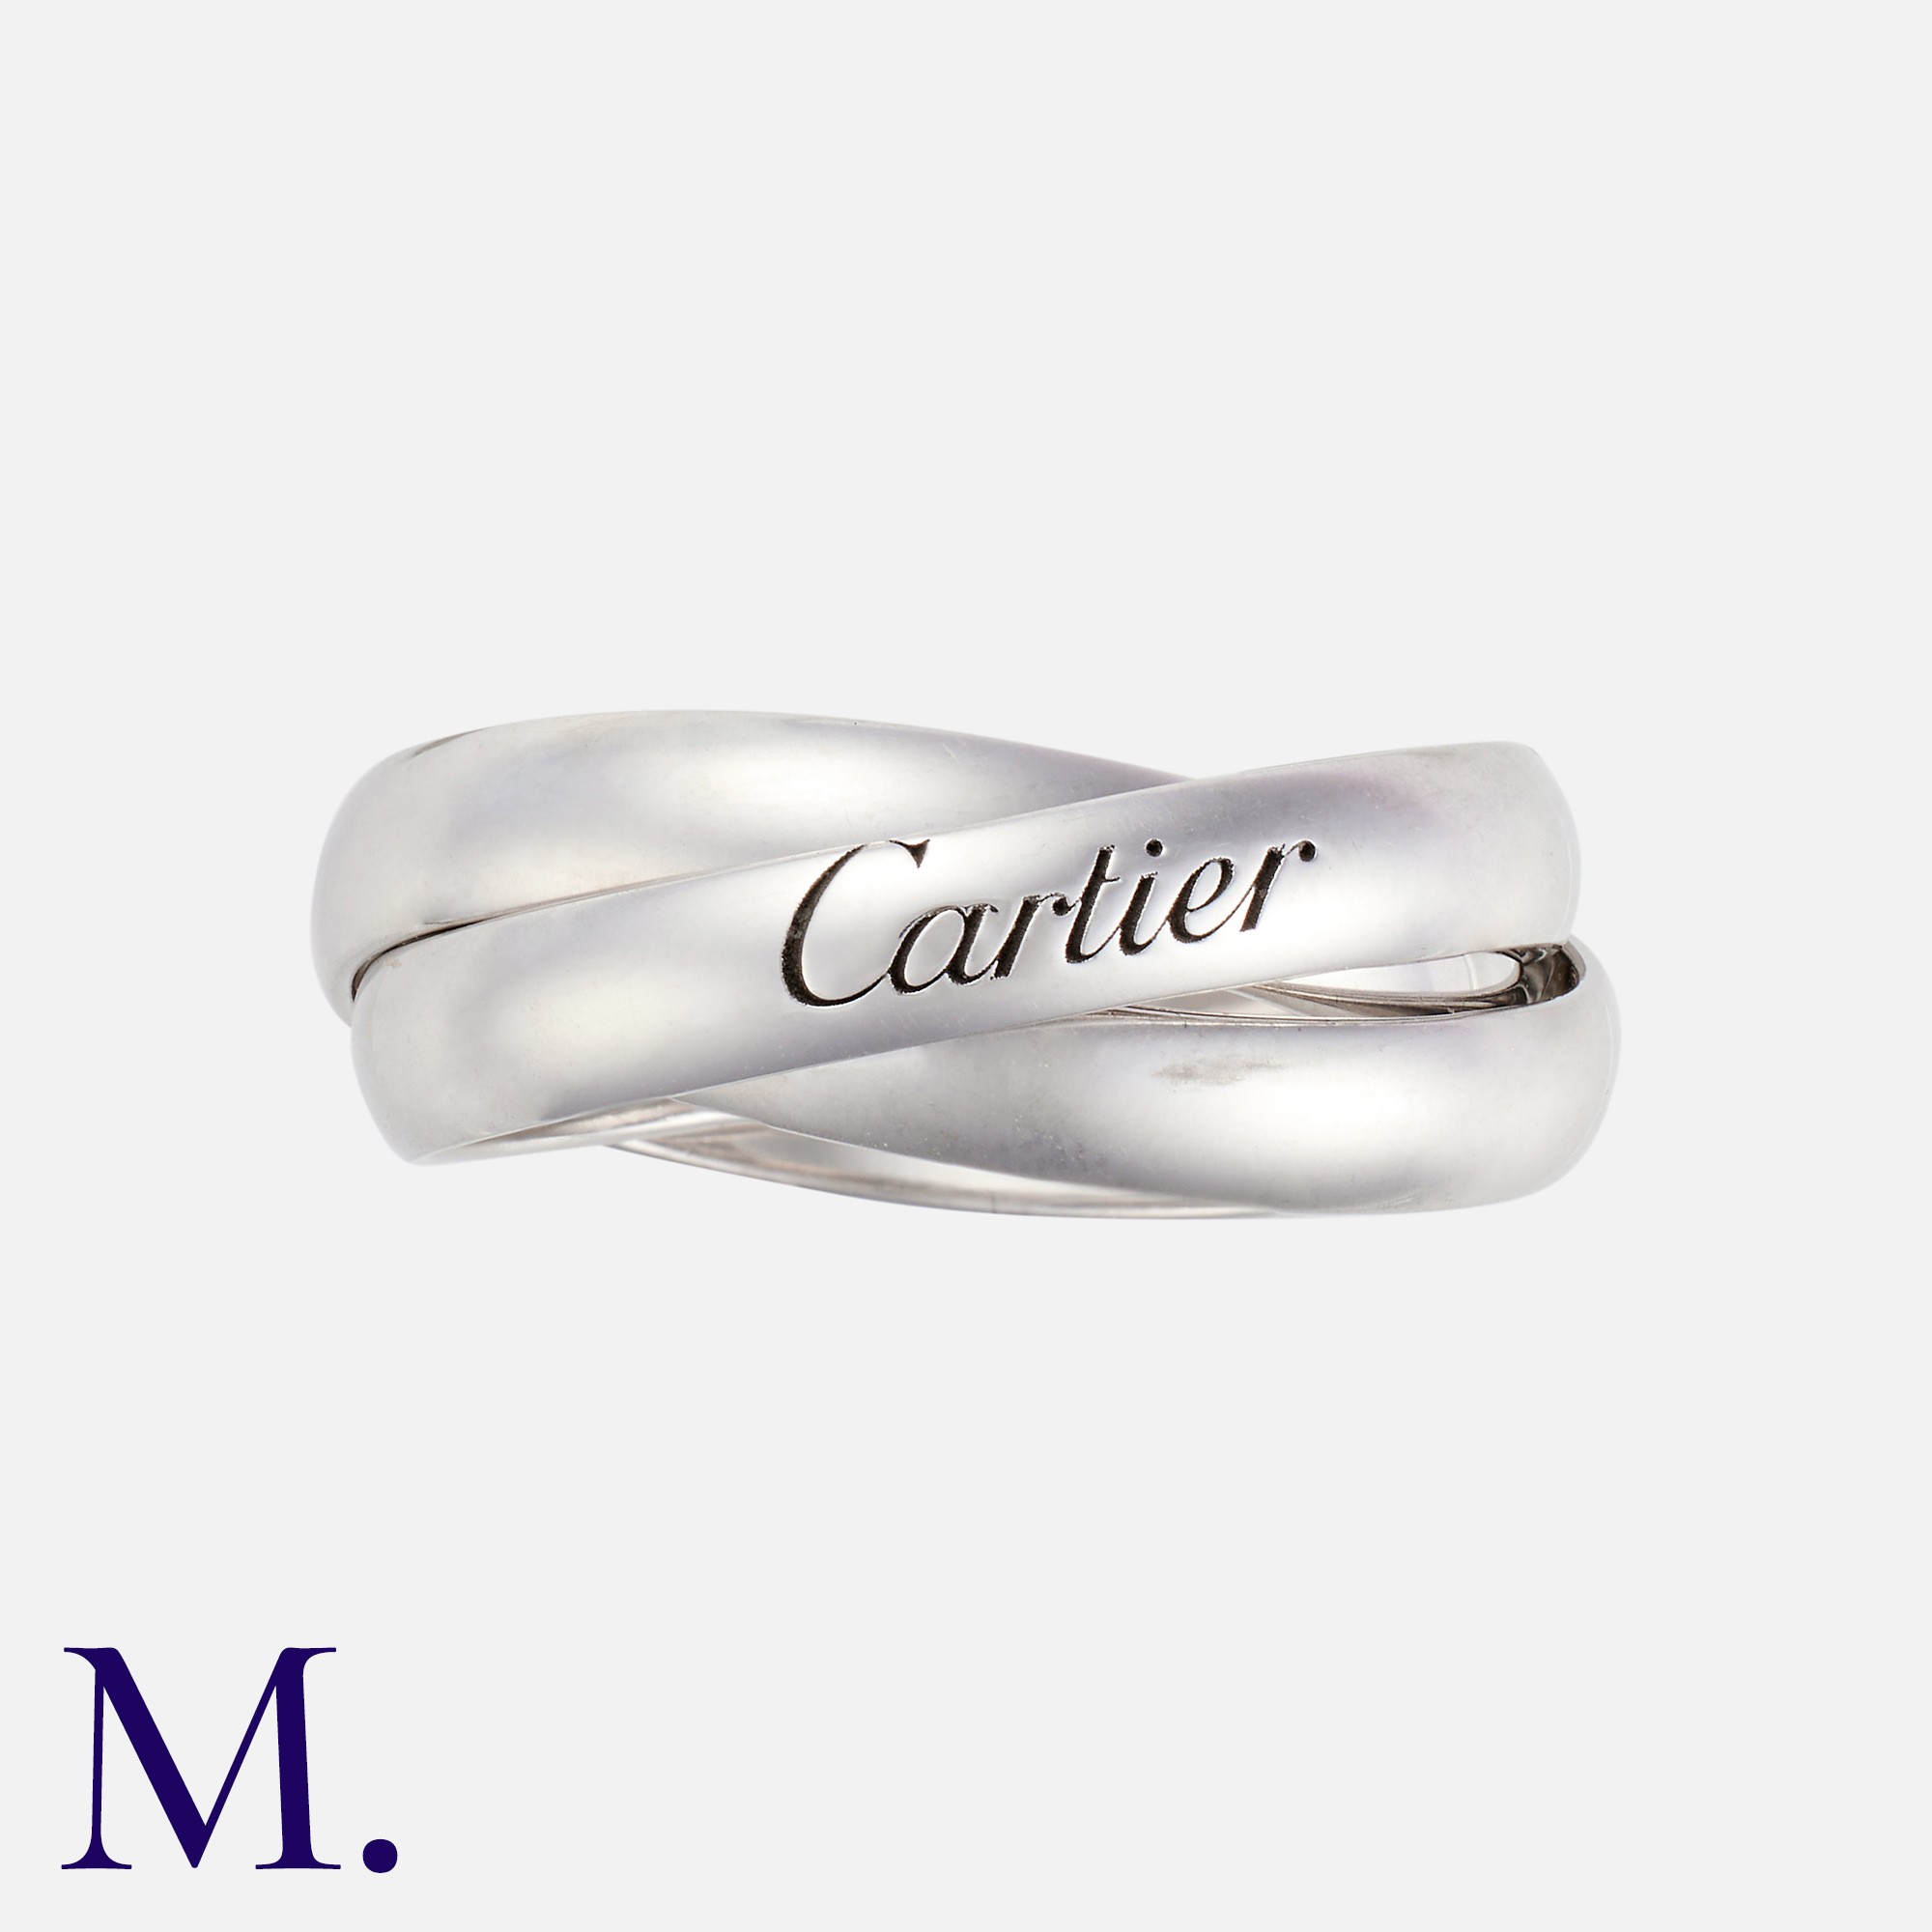 CARTIER. A Trinity Ring in 18K white gold. Signed Cartier and marked for 18ct gold. With Cartier